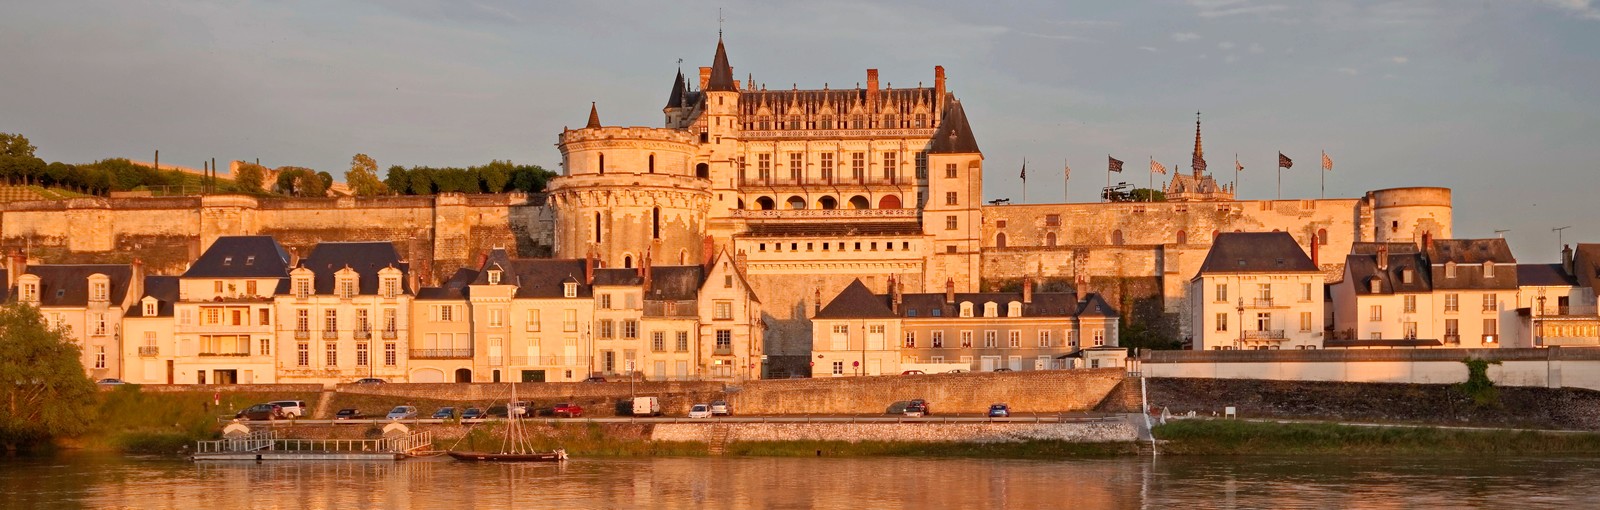 Tours Castles of the Loire valley - Normandy - Multi-regional - Multiday tours from Paris